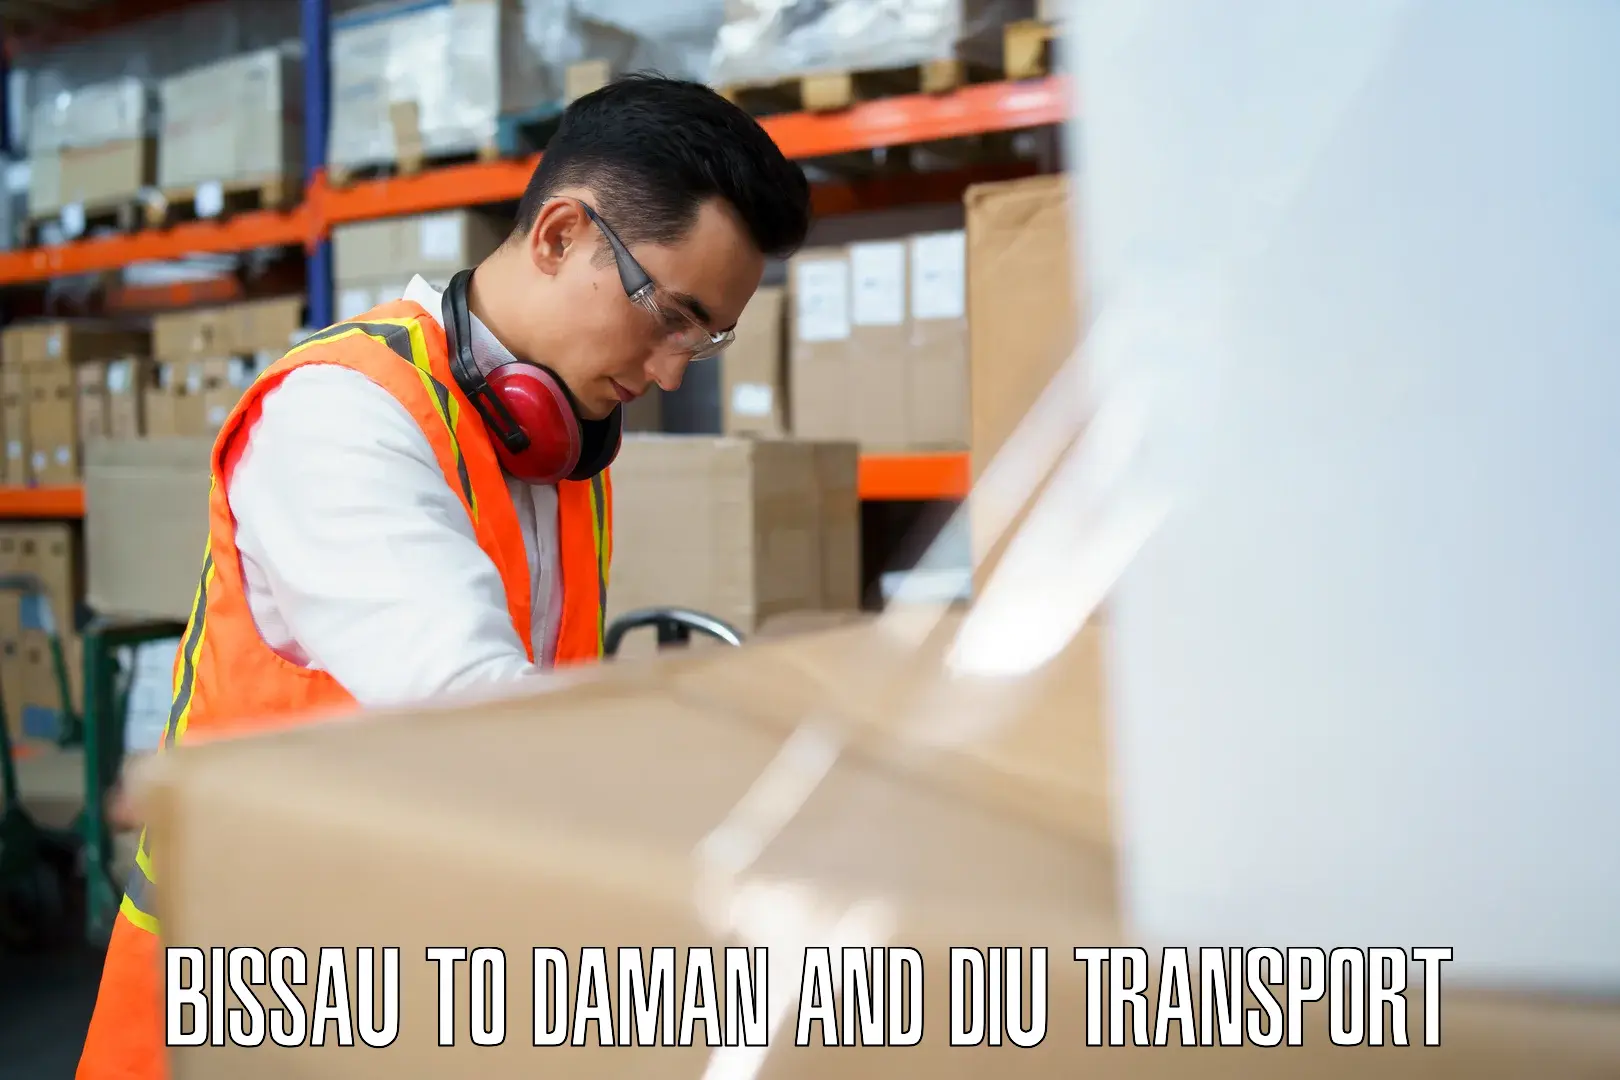 Domestic goods transportation services Bissau to Daman and Diu